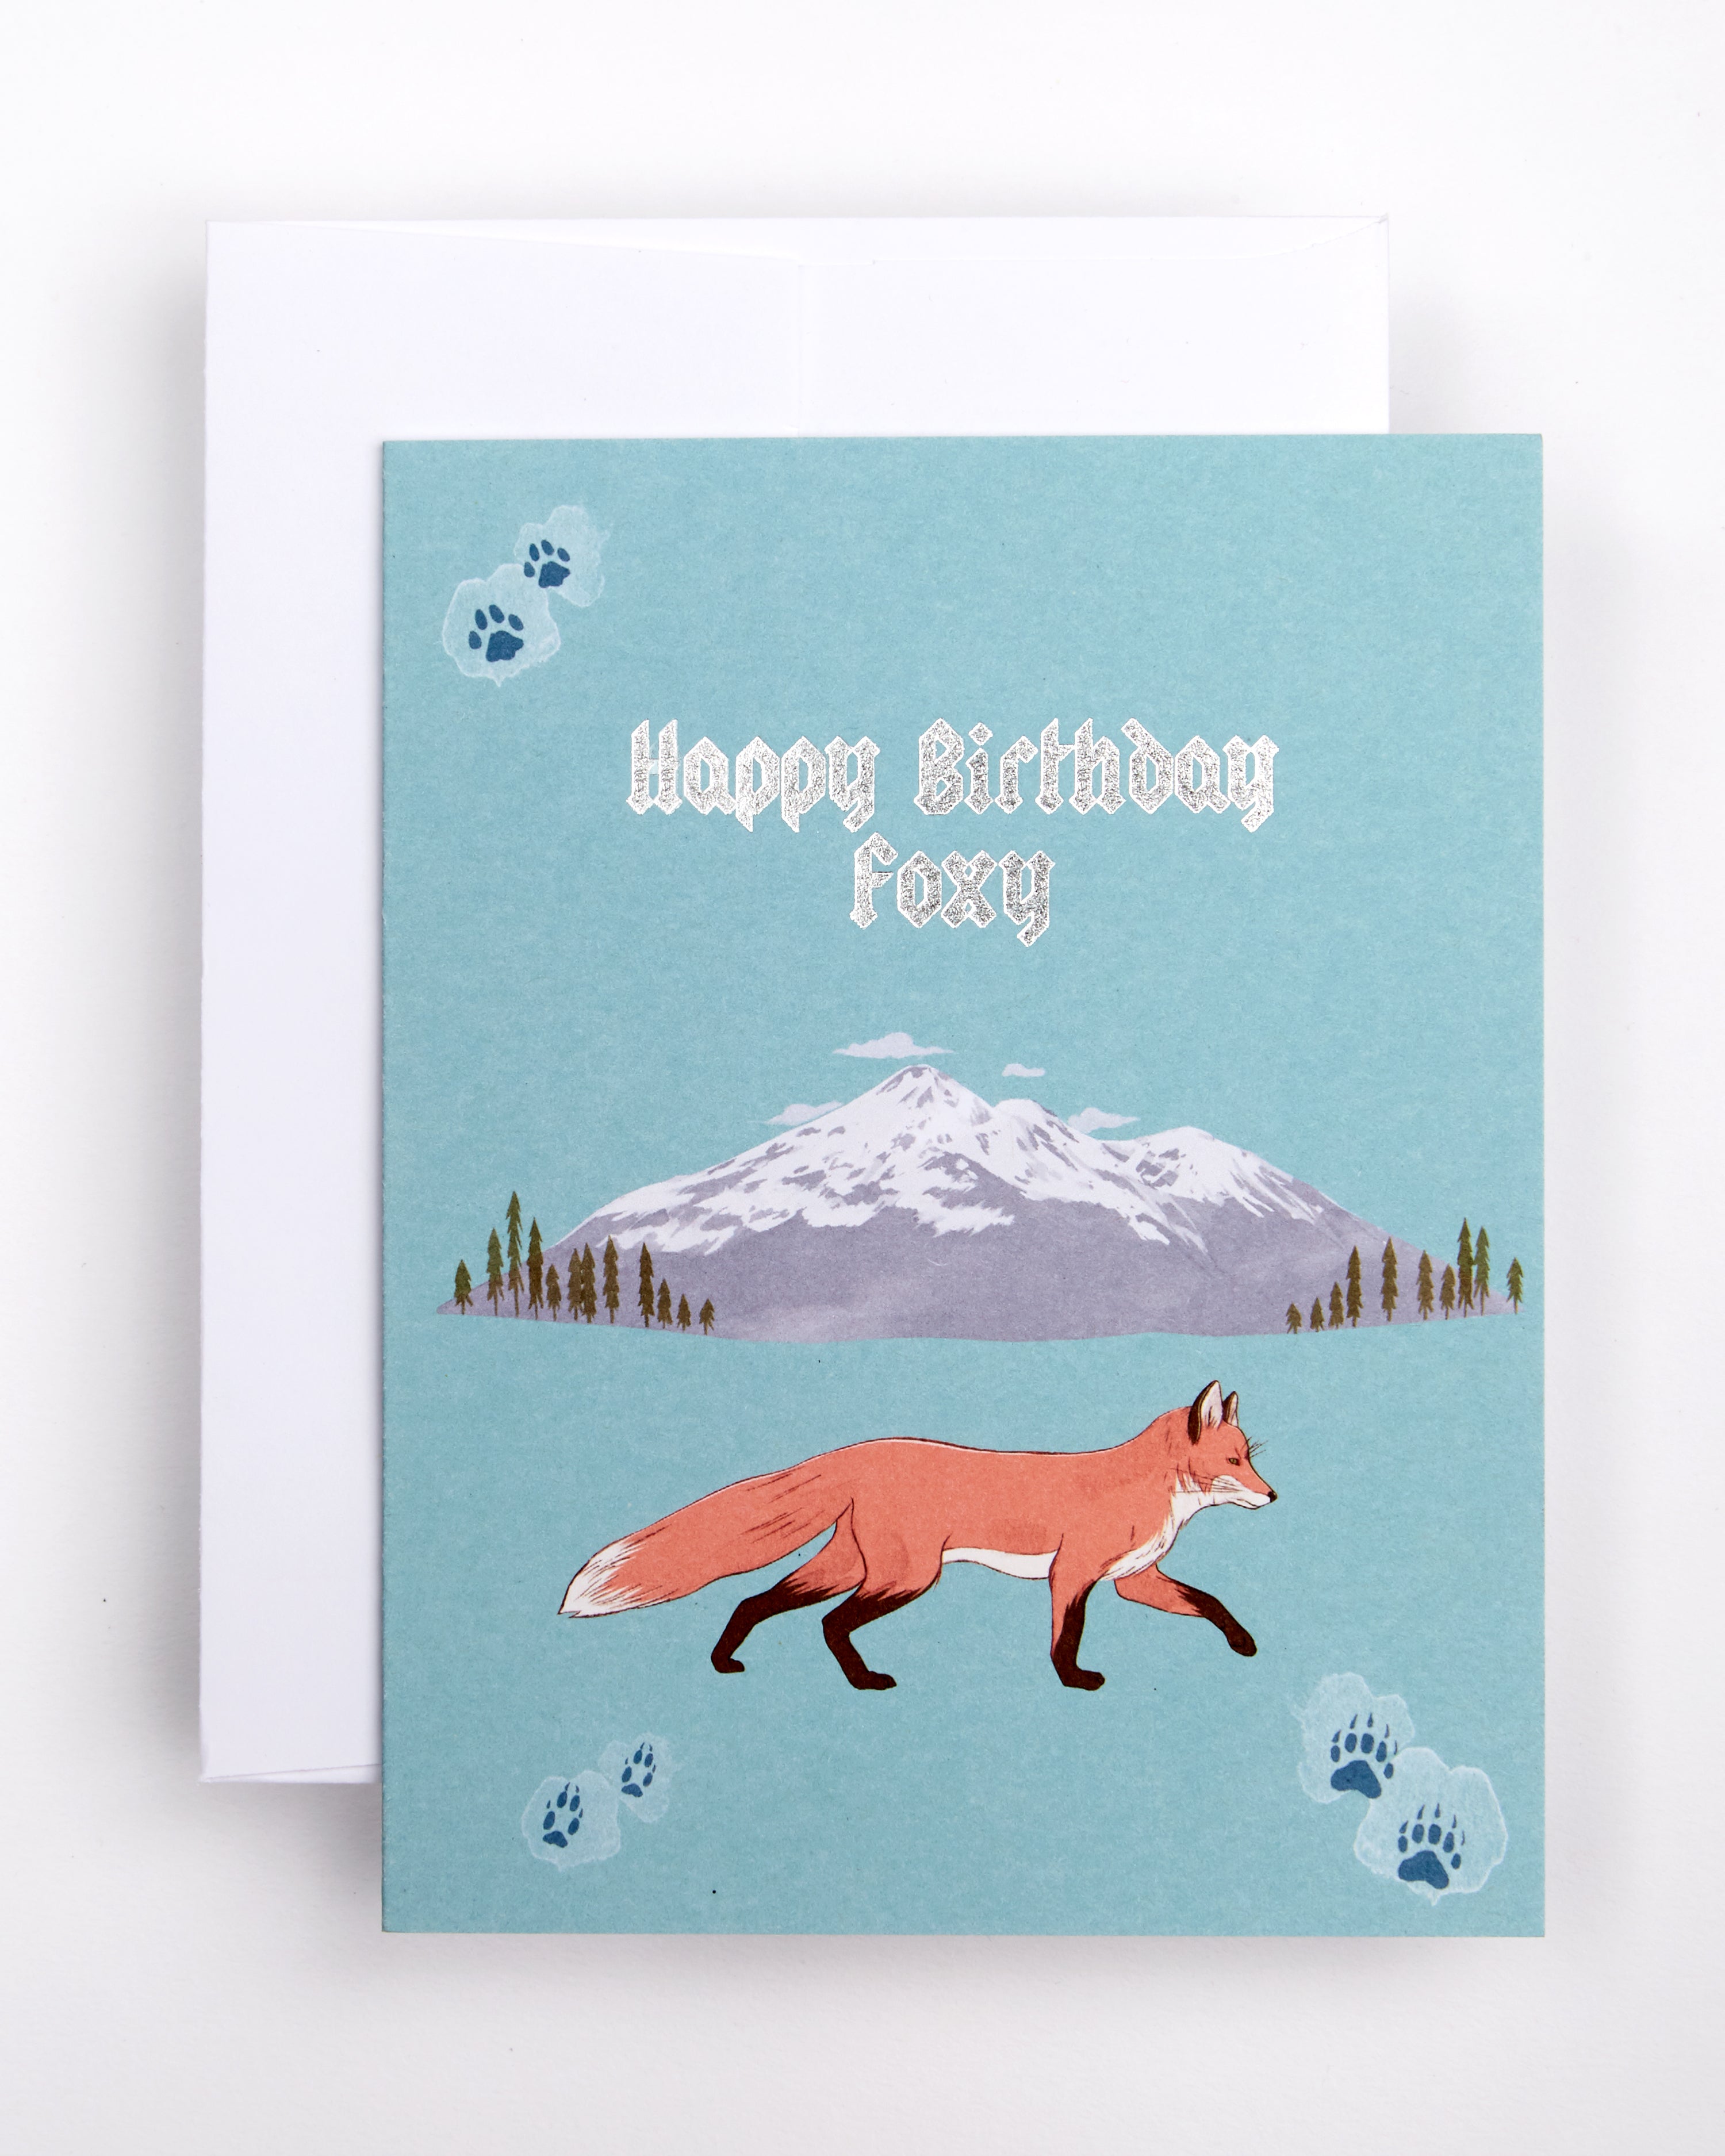 Greeting card with the text Happy Birthday Foxy above a fox